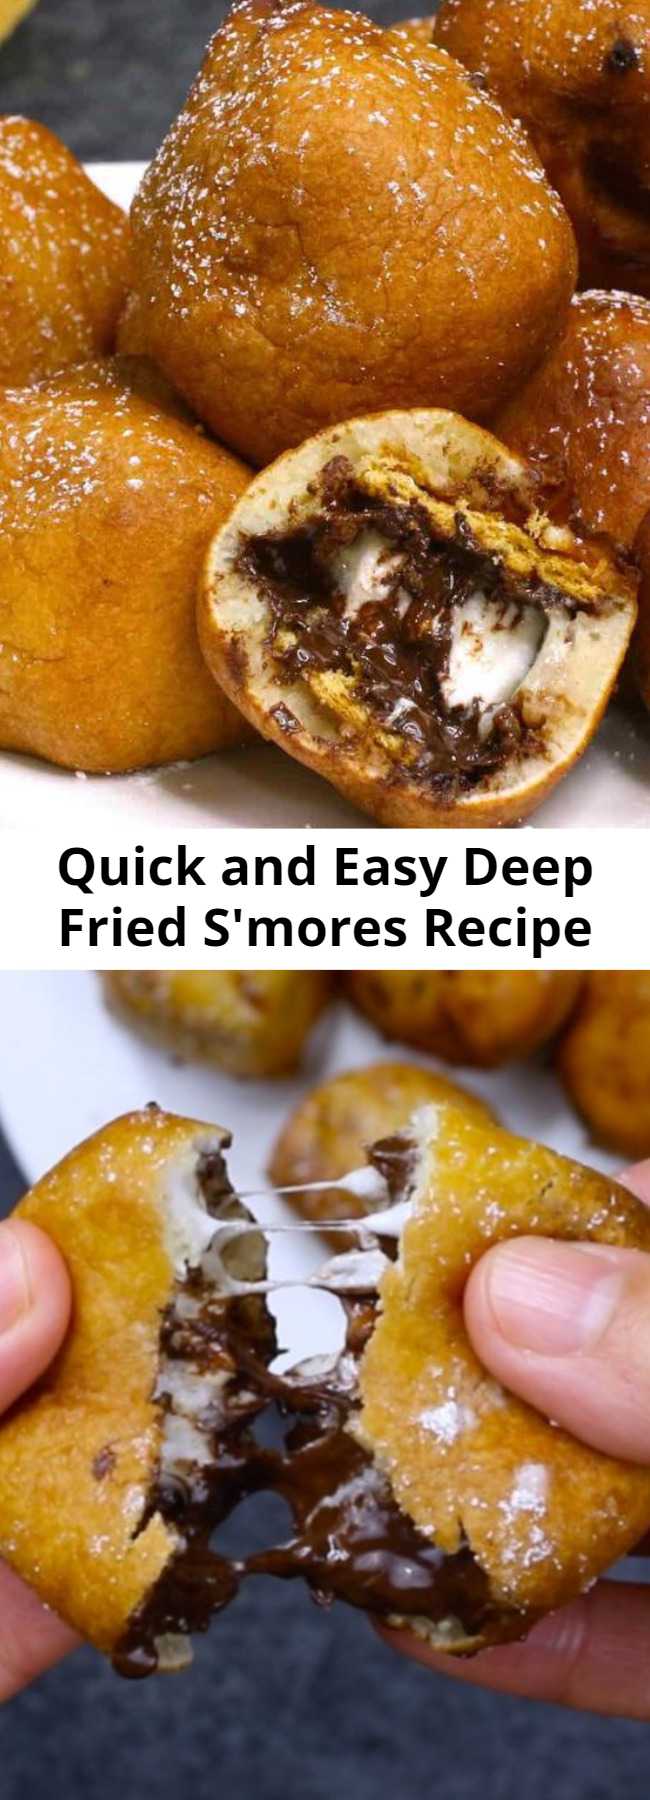 Quick and Easy Deep Fried S'mores Recipe – OMG seriously one of the most delicious dessert! Smores dipped in homemade batter, and fried to a fluffy, golden crispy ball with a warm and melty chocolate chips and marshmallow inside. Quick and easy recipe. Perfect for party desserts. No bake, vegetarian.